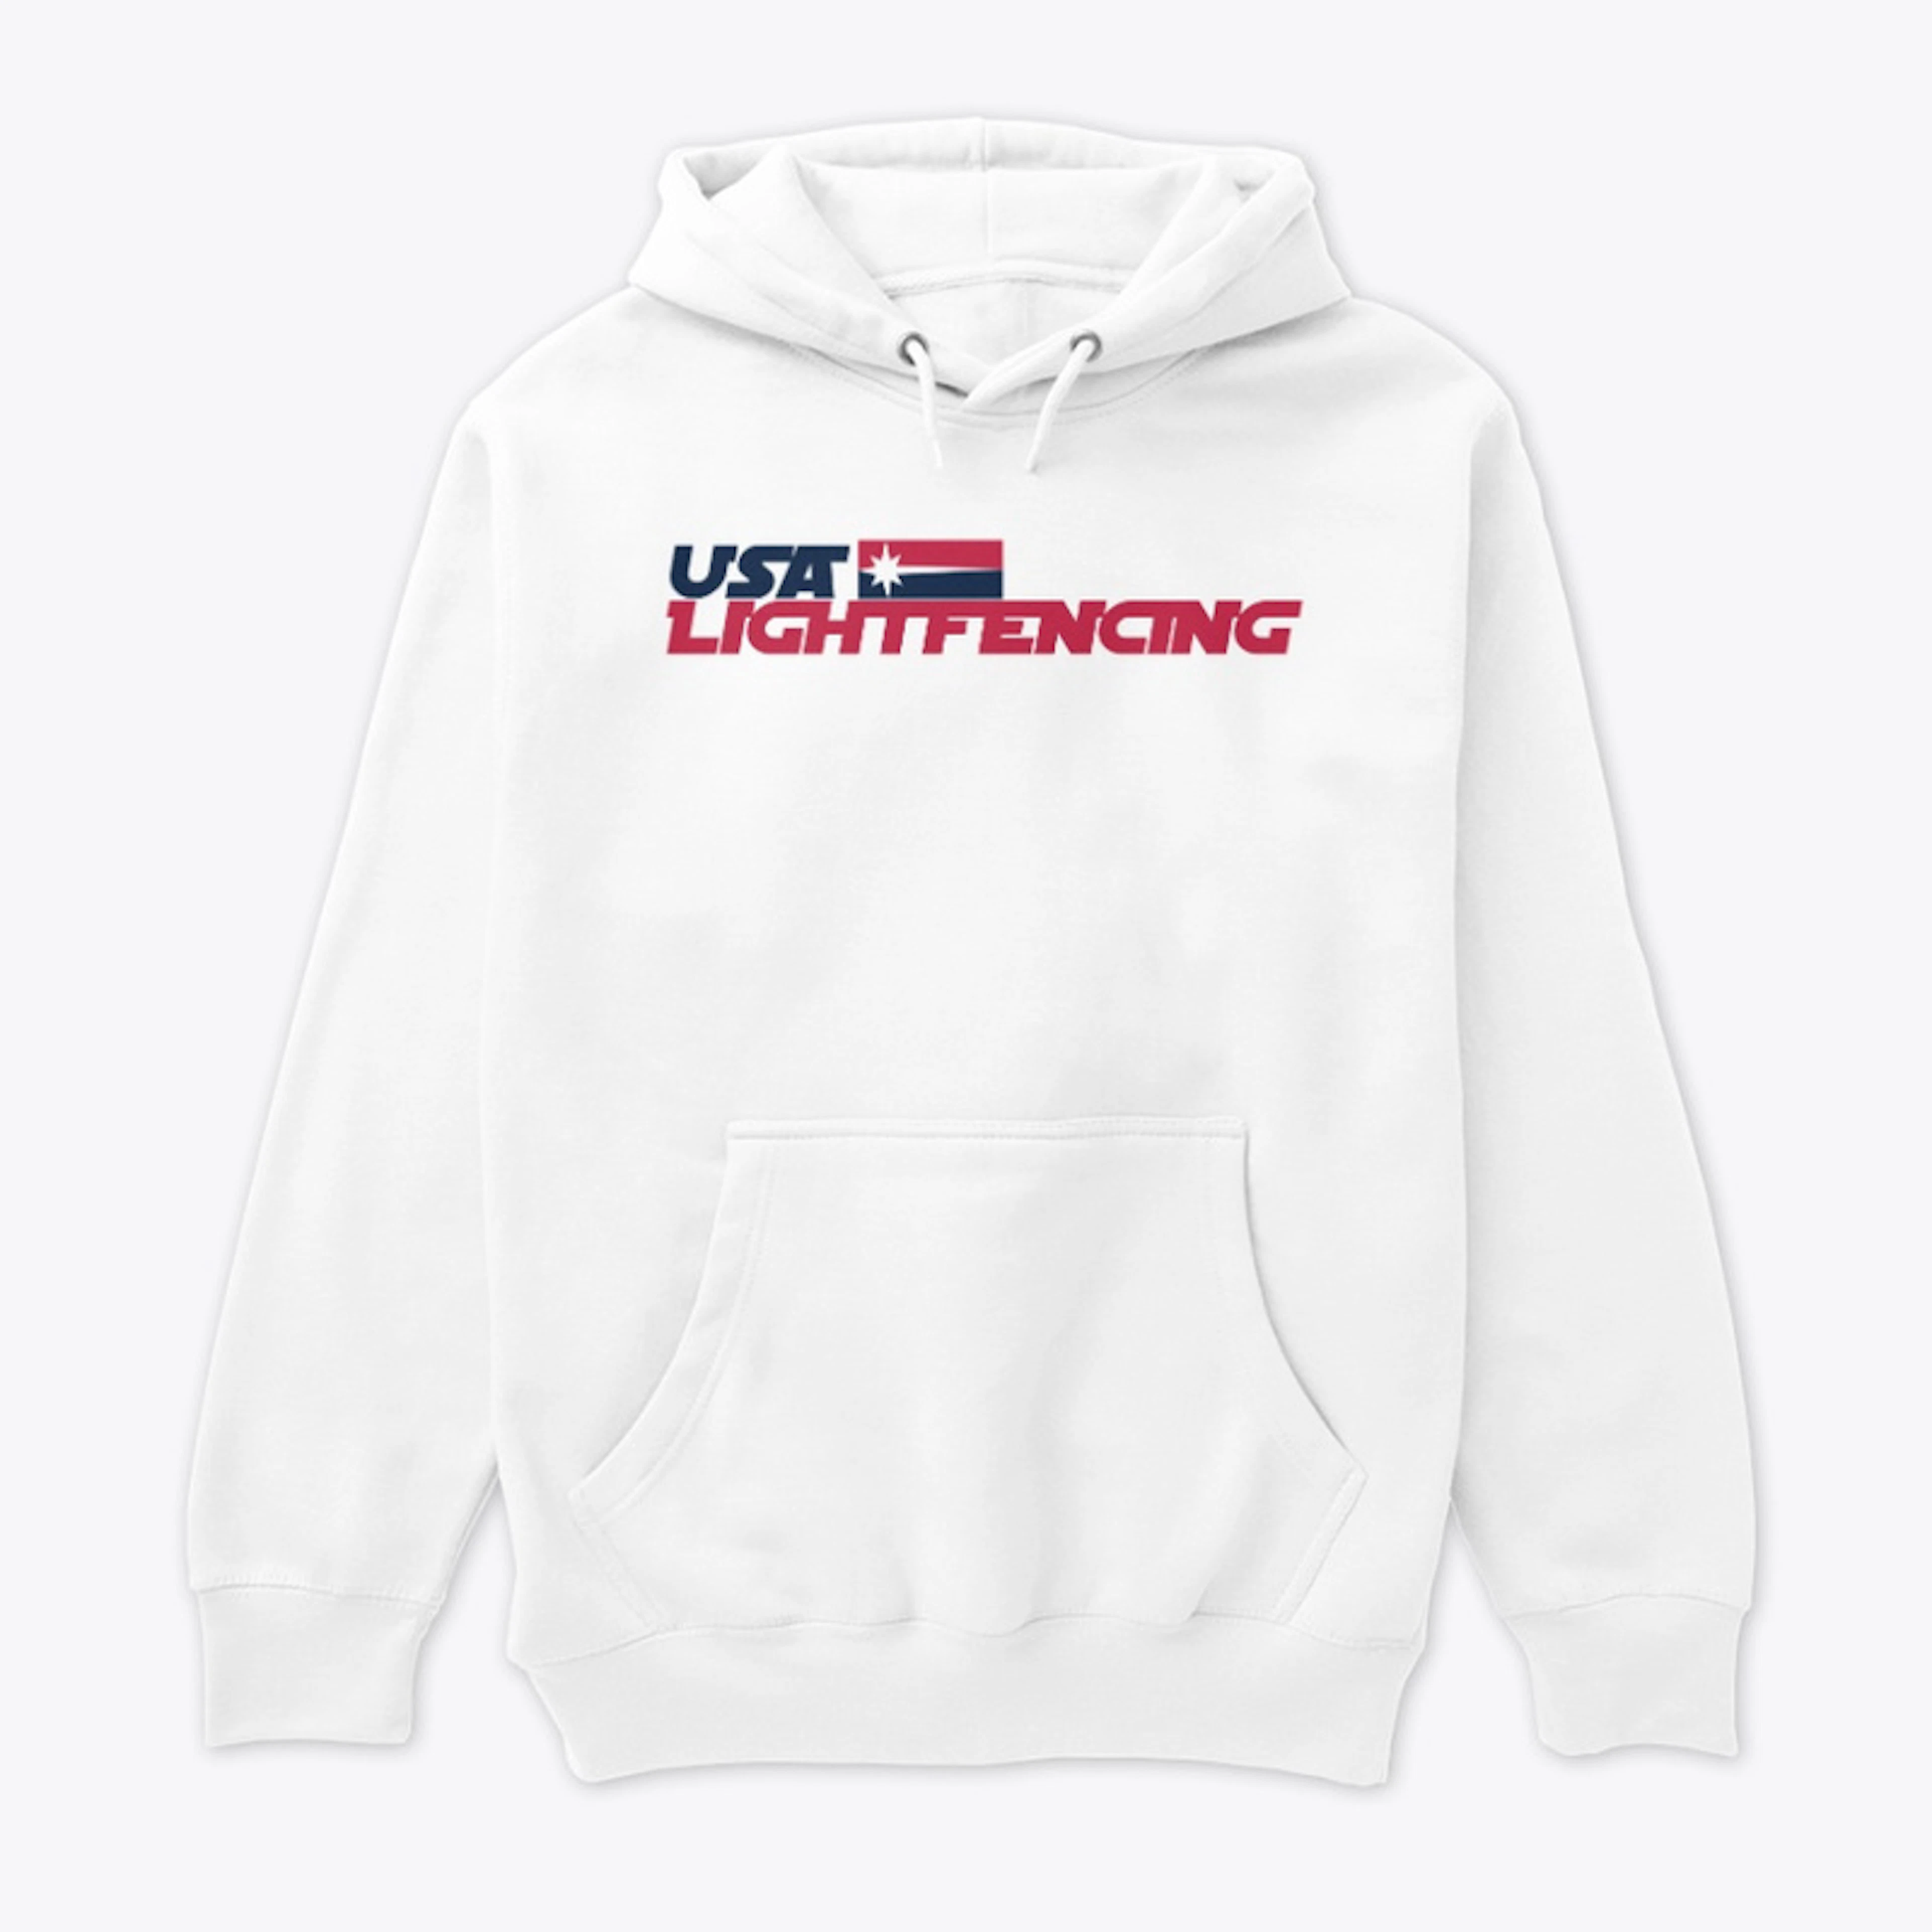 USA Lightfencing Official 